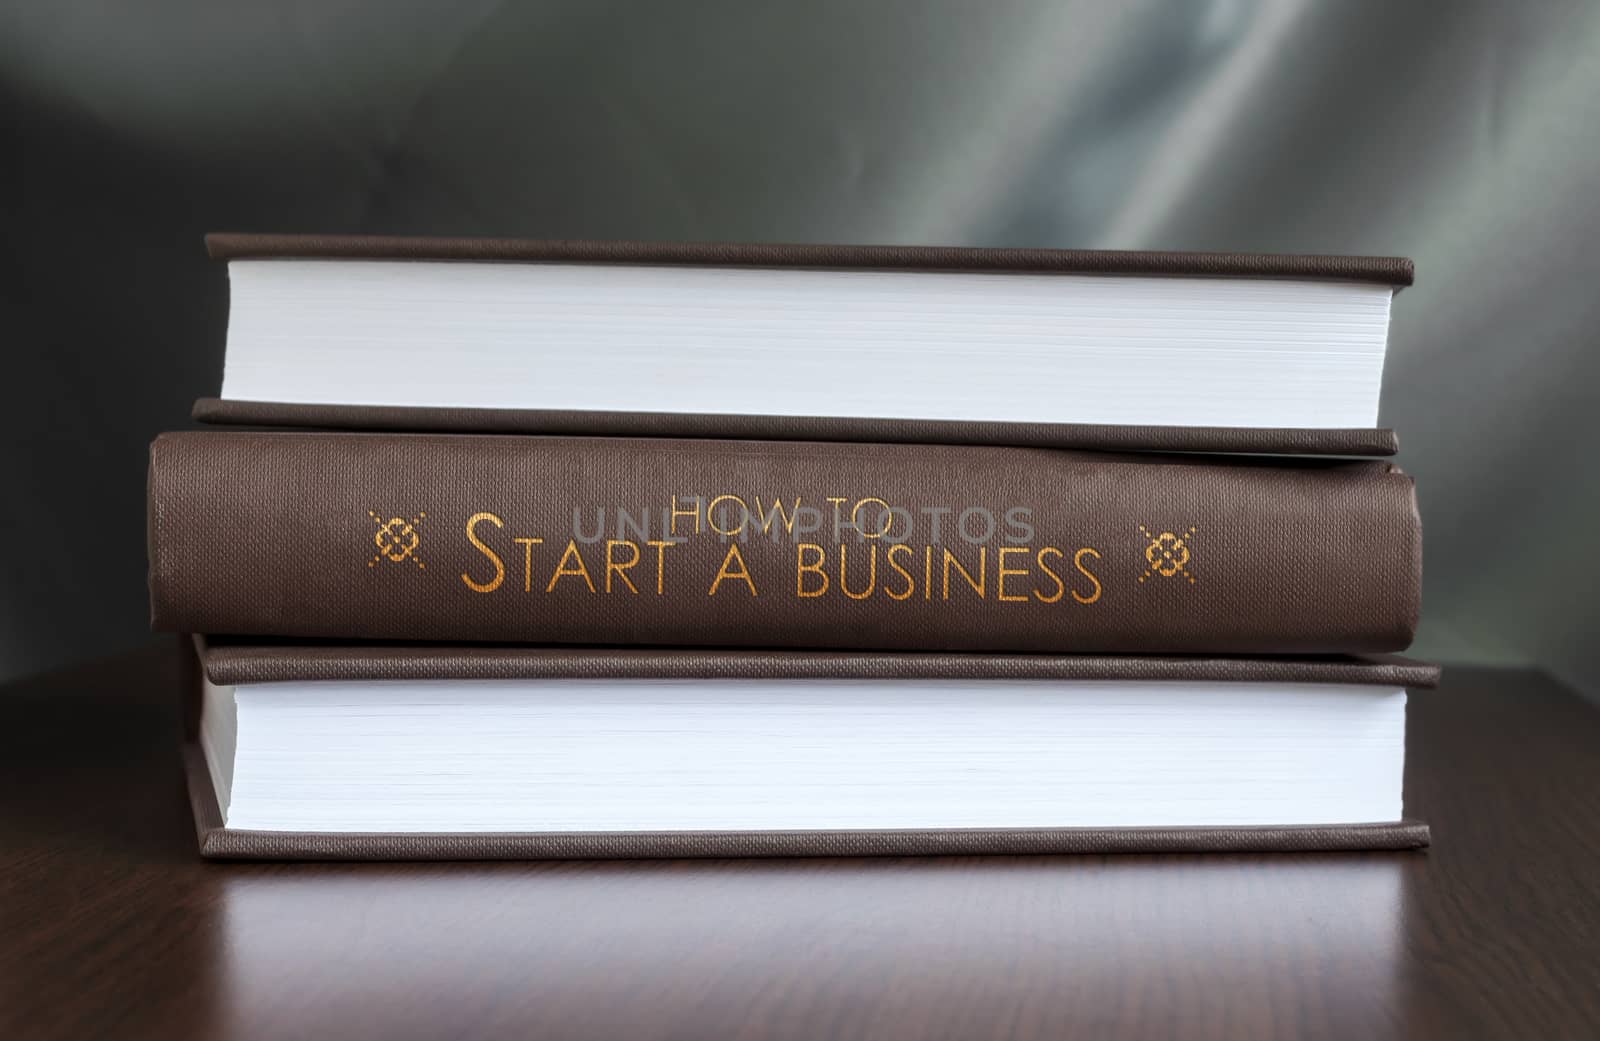 How to start a business. Book concept. by maxmitzu